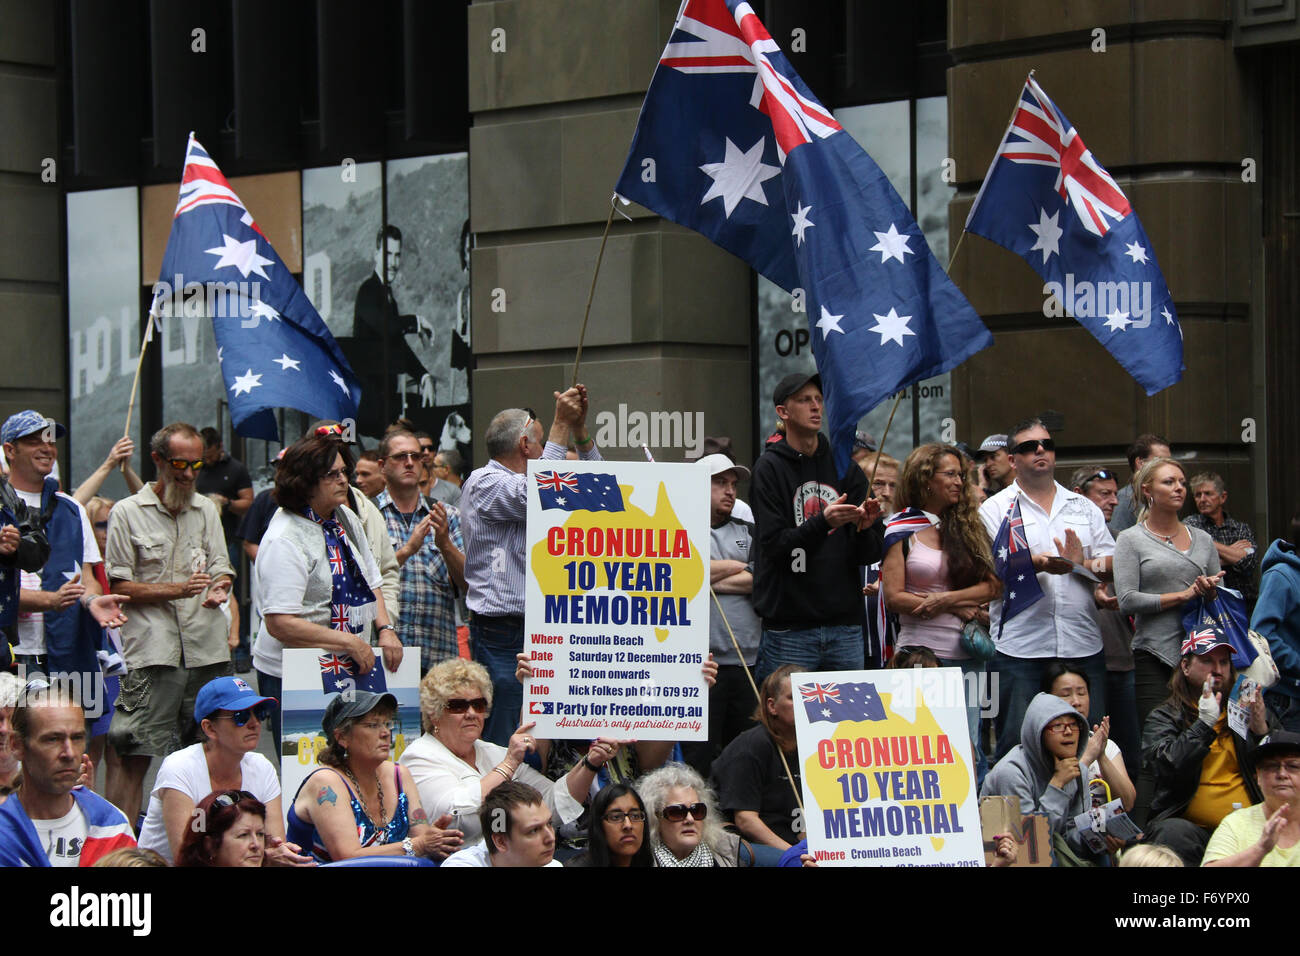 Sydney, Australia. 22nd November 2015. Pictured: Some protesters hold signs promoting the 10 year Cronulla memorial, which takes place on the anniversary of the Cronulla riots uprising. A few hundred people rallied at the amphitheatre in Martin Place, Sydney as part of a day of rallies across the nation in support of the Australia way of life and against the Islamification of Australia and the threat of terrorism, particularly after the Sydney siege. Credit:  Richard Milnes/Alamy Live News Stock Photo